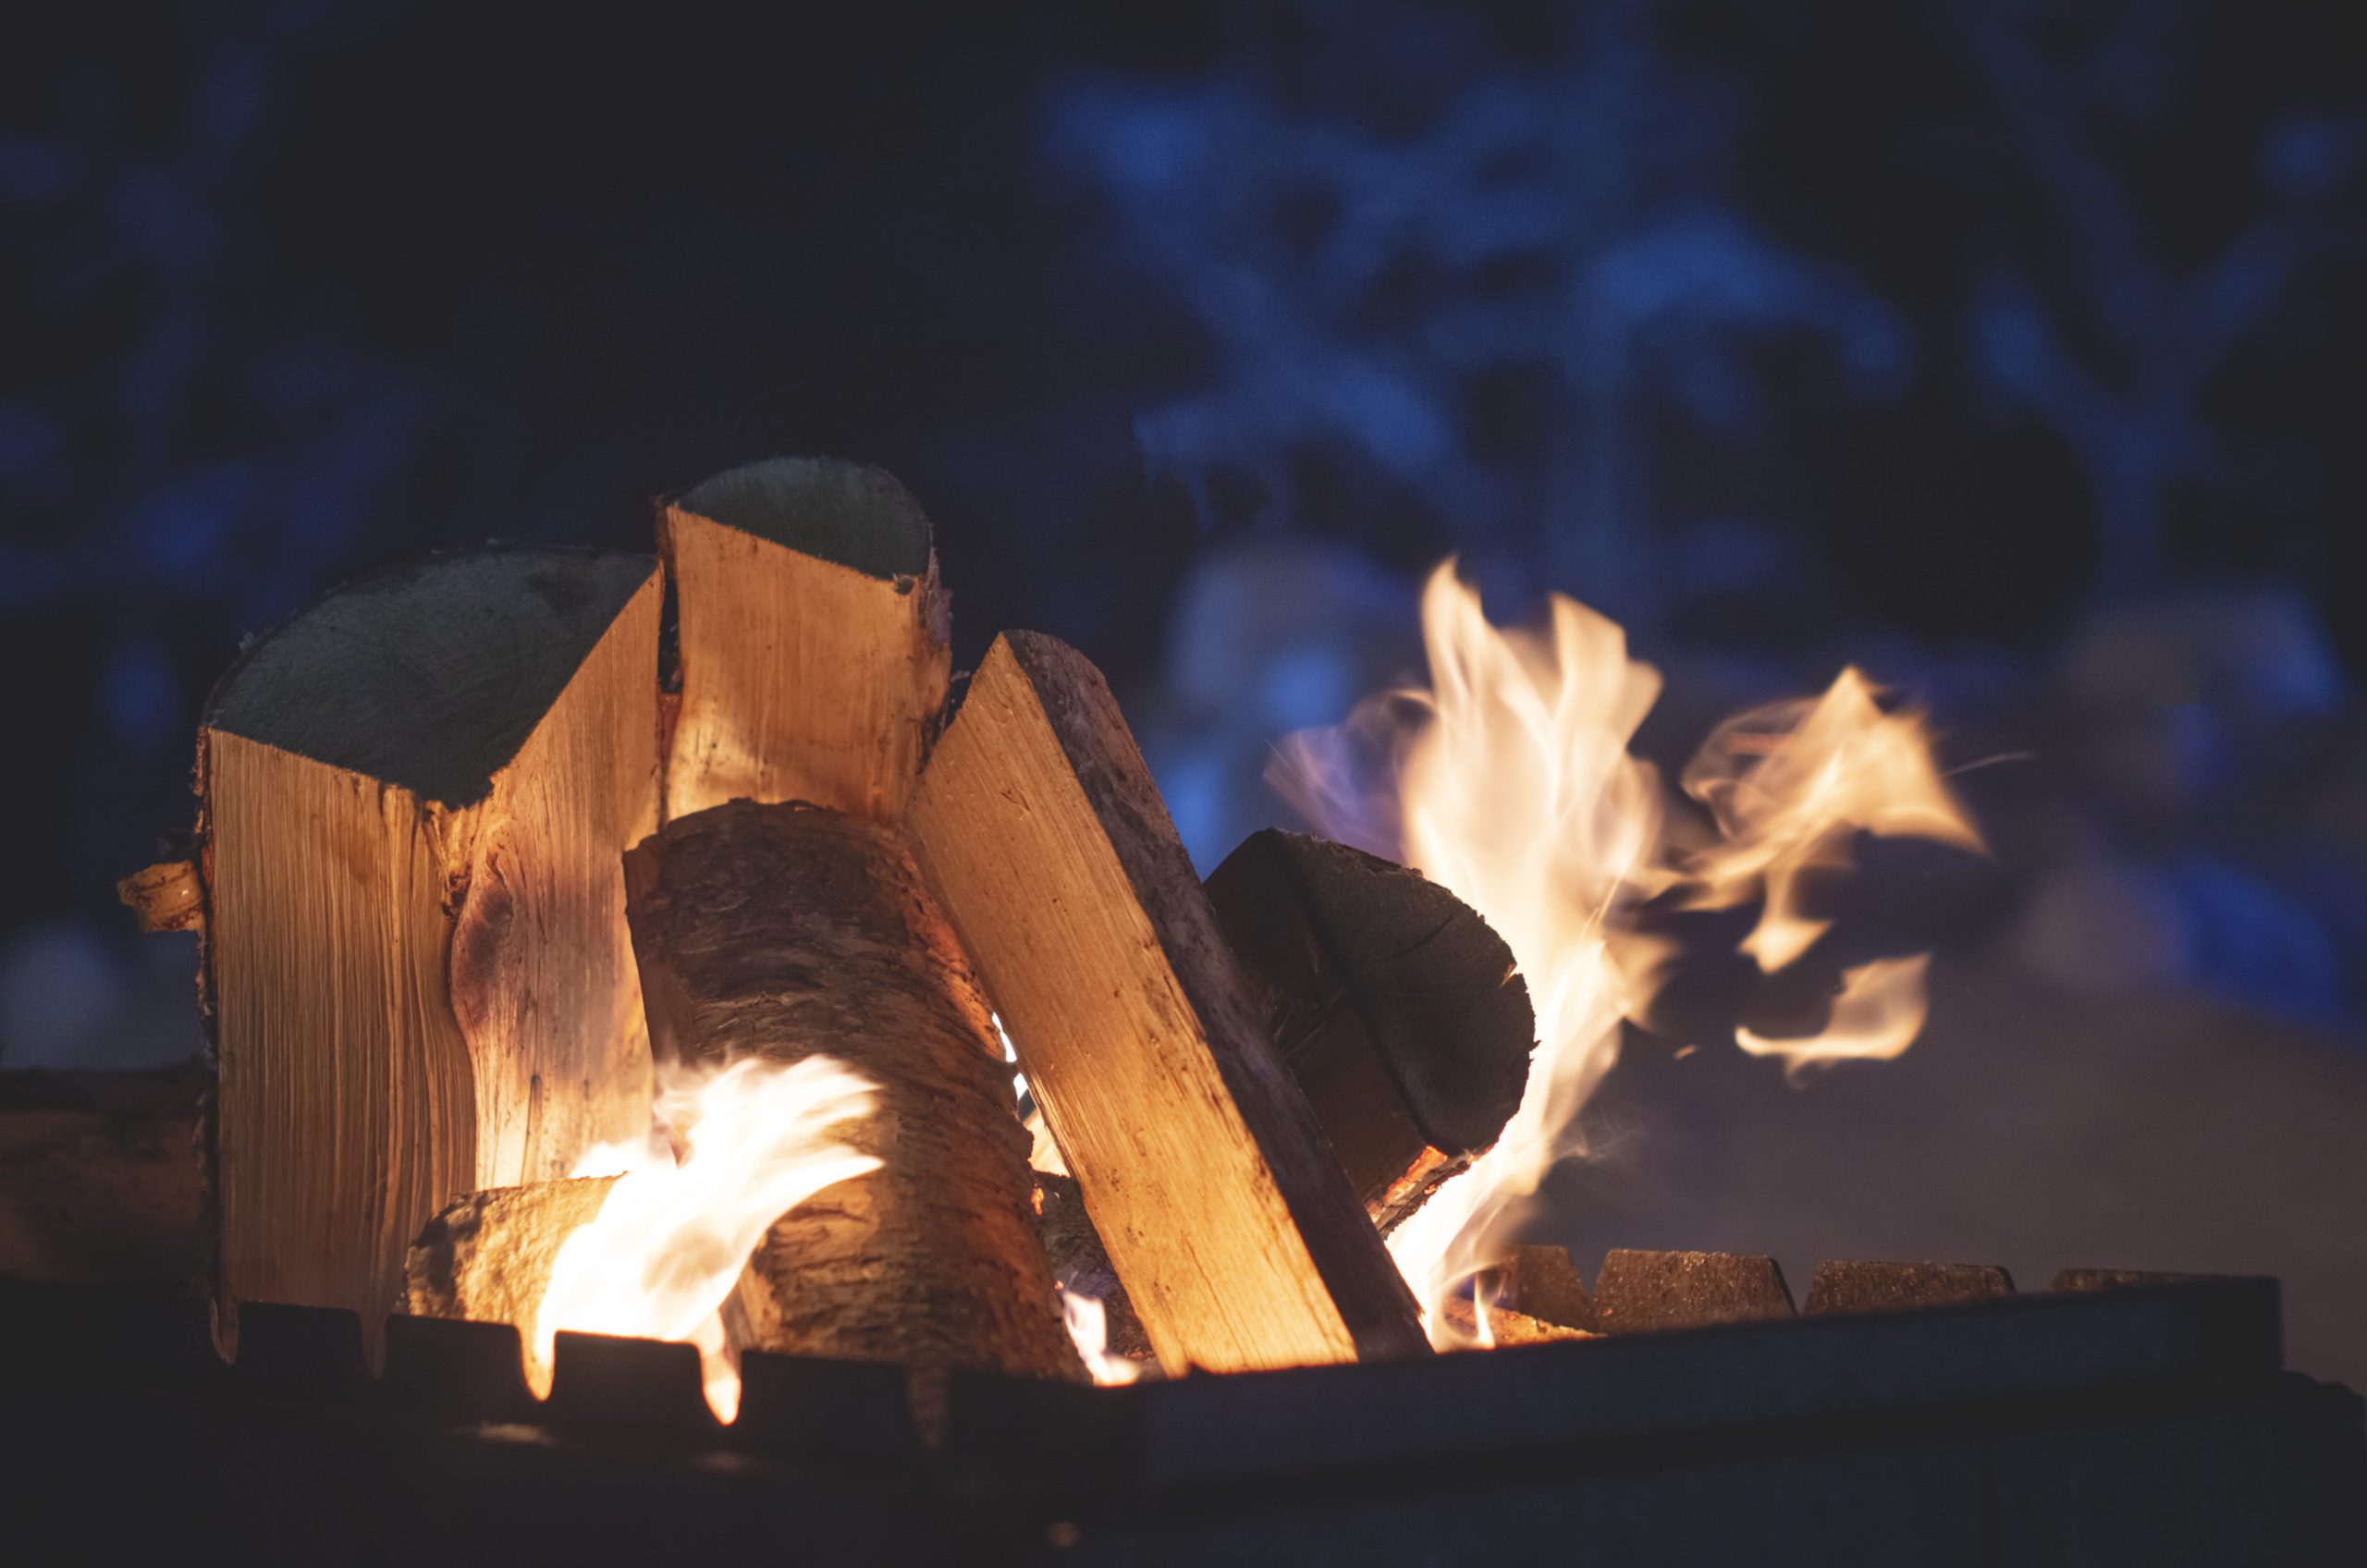 Photograph of a camp fire, close up of the wood and flames